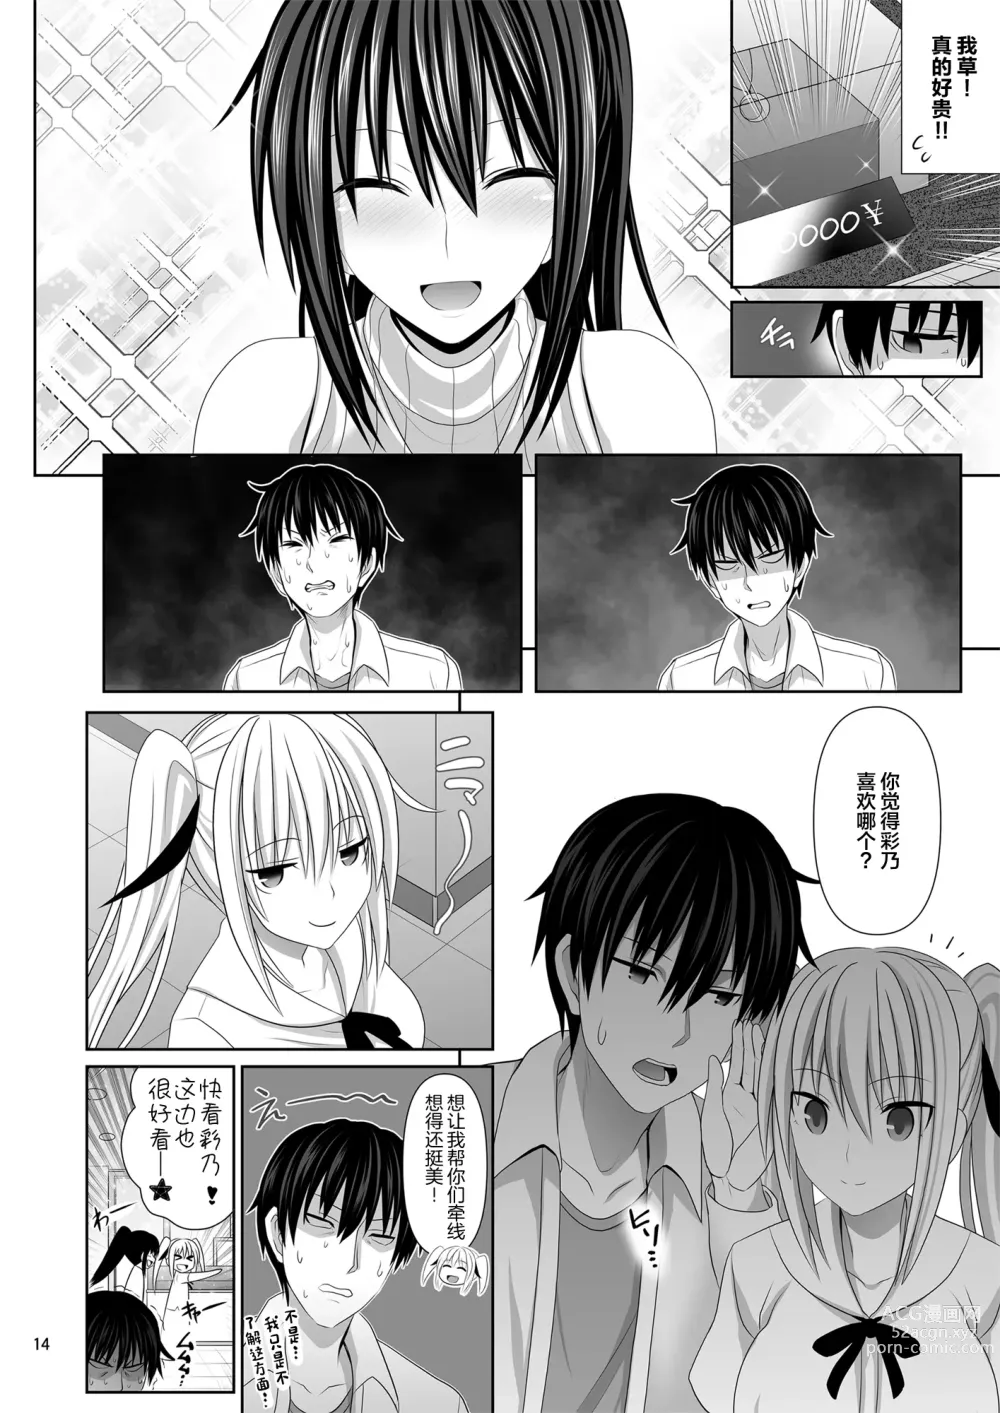 Page 14 of doujinshi SEX FRIEND 6